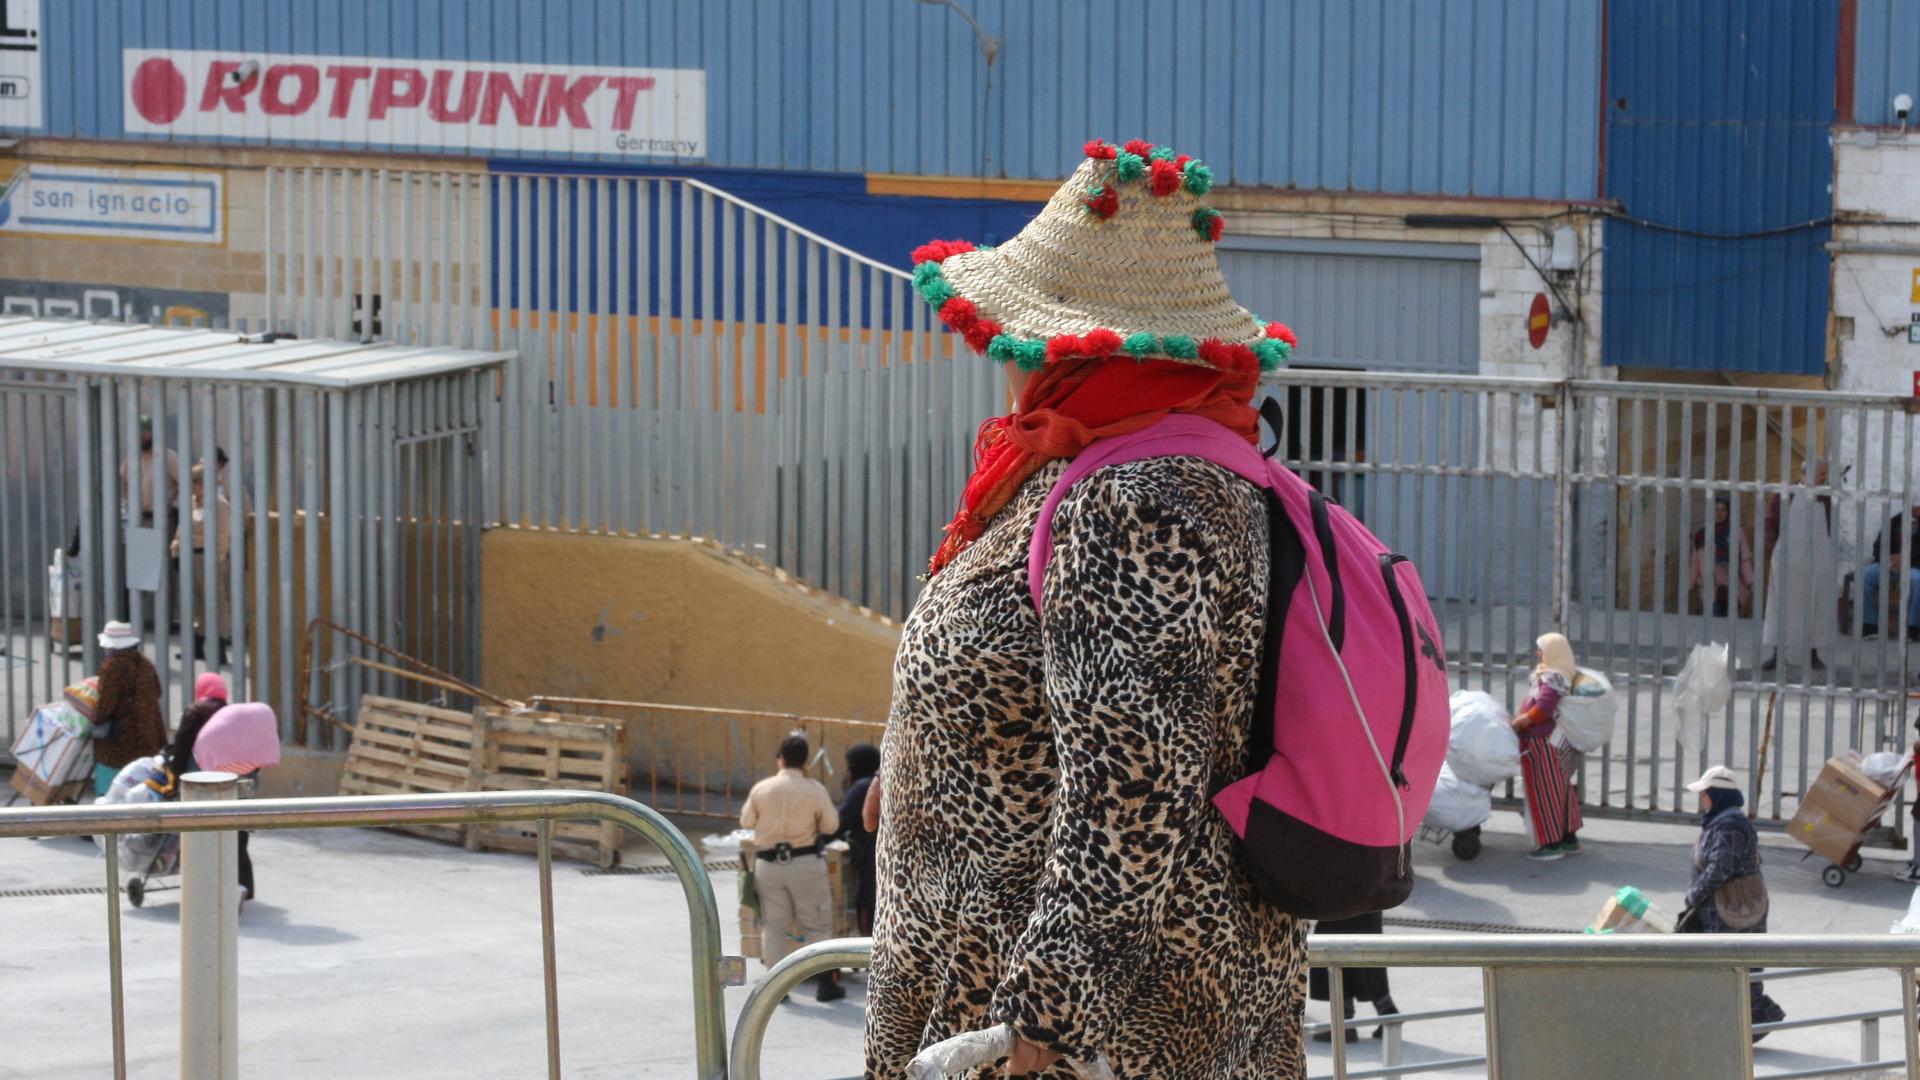 A woman porter in Ceuta wears colorful straw hat and leopard print jacket